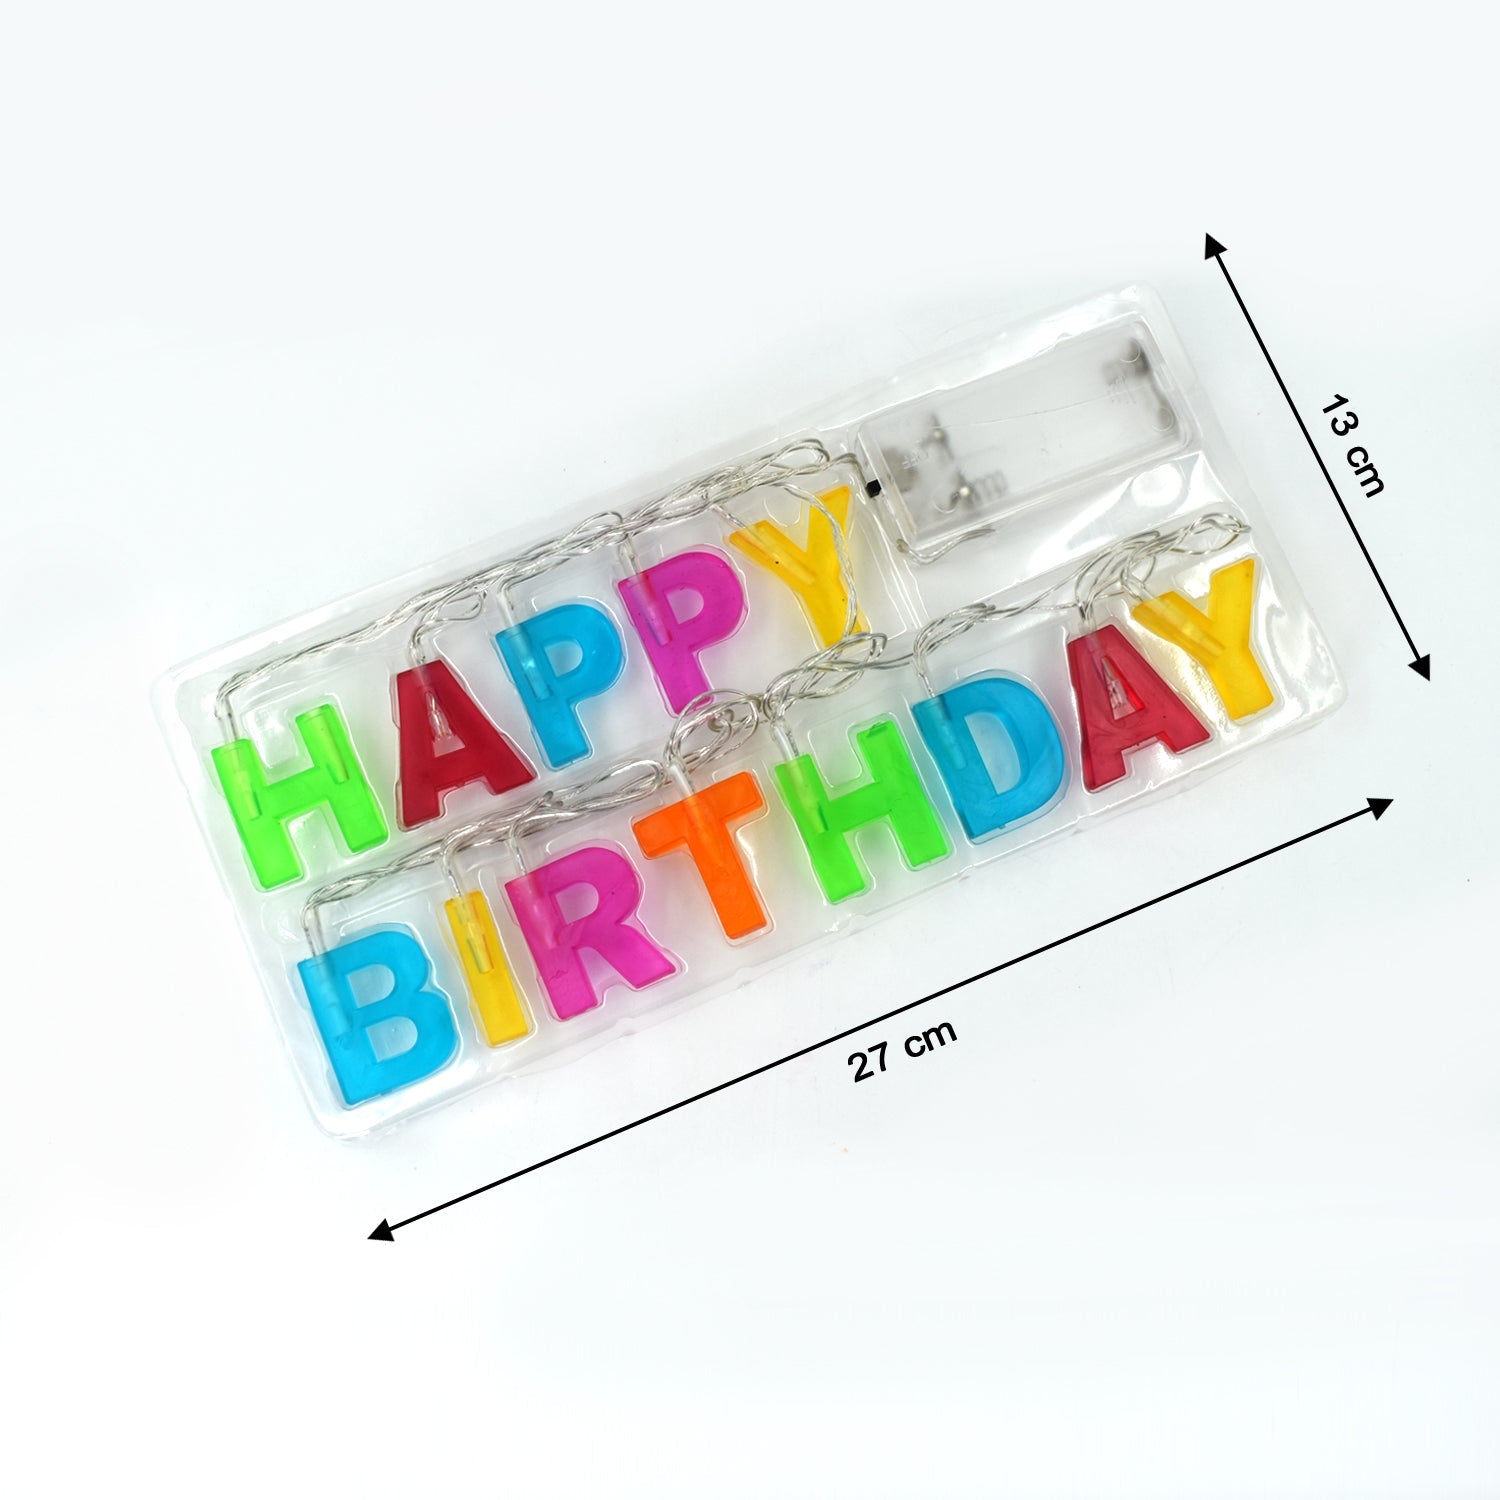 4815 Decoratives Plastic Happy Birthday 13 LED Letter Battery Operated String Lights, Outdoor String Lights (Multicolour) 